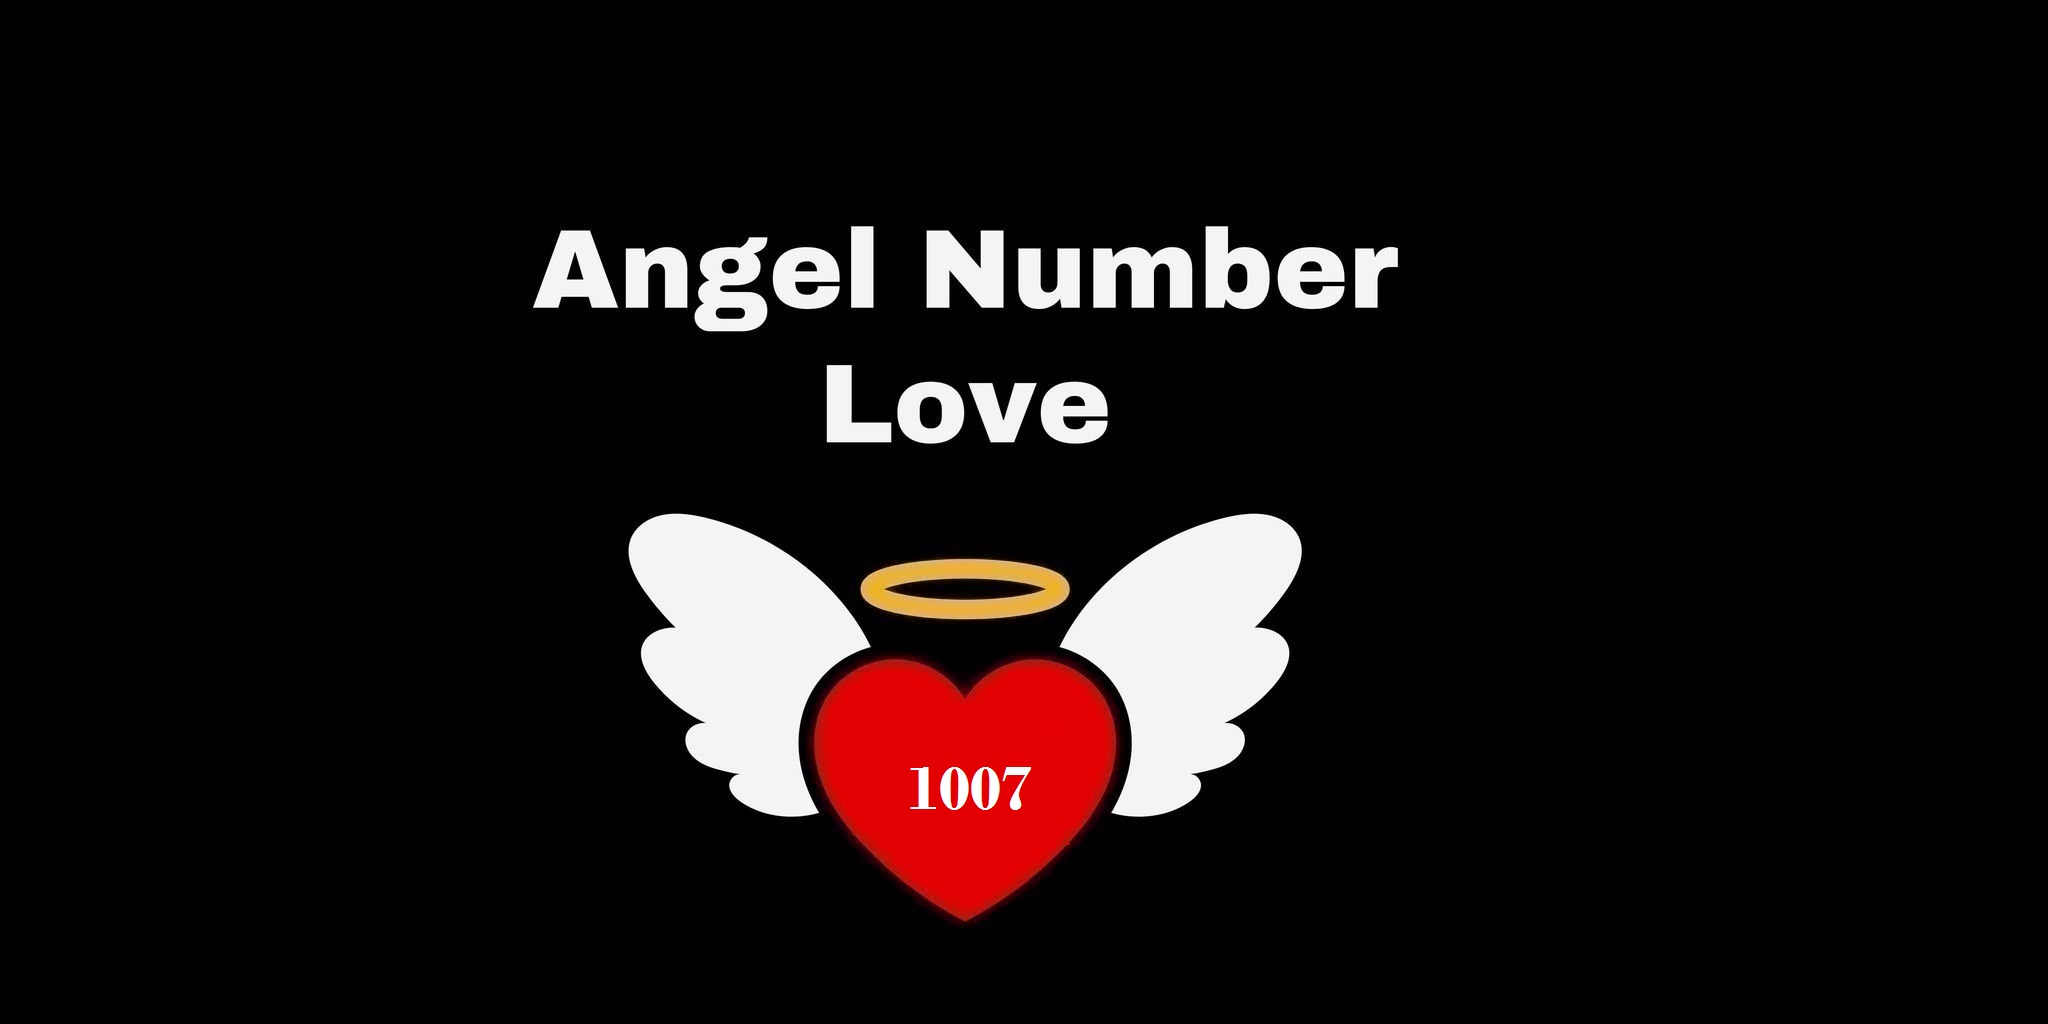 1007 Angel Number Meaning In Love